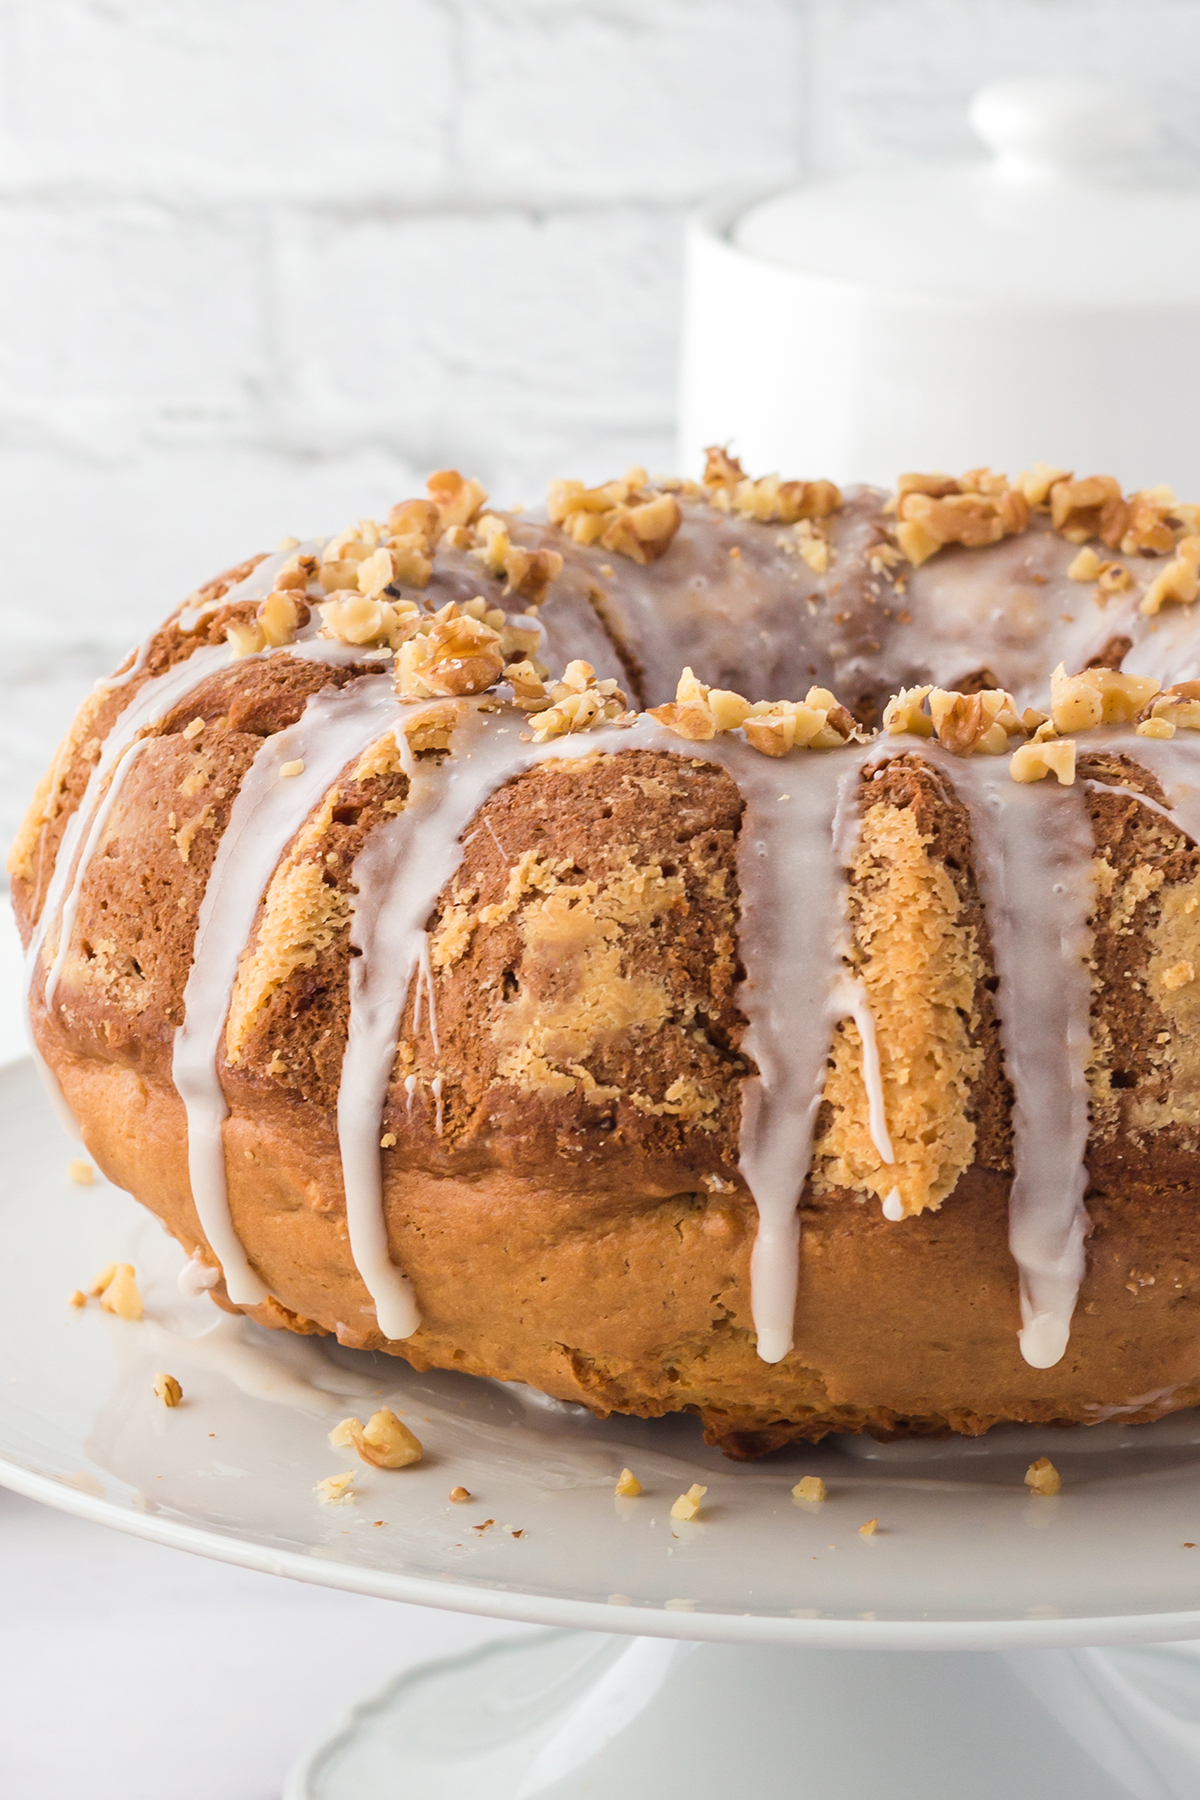 off center side view image of maple walnut bundt cake on a white cake stand